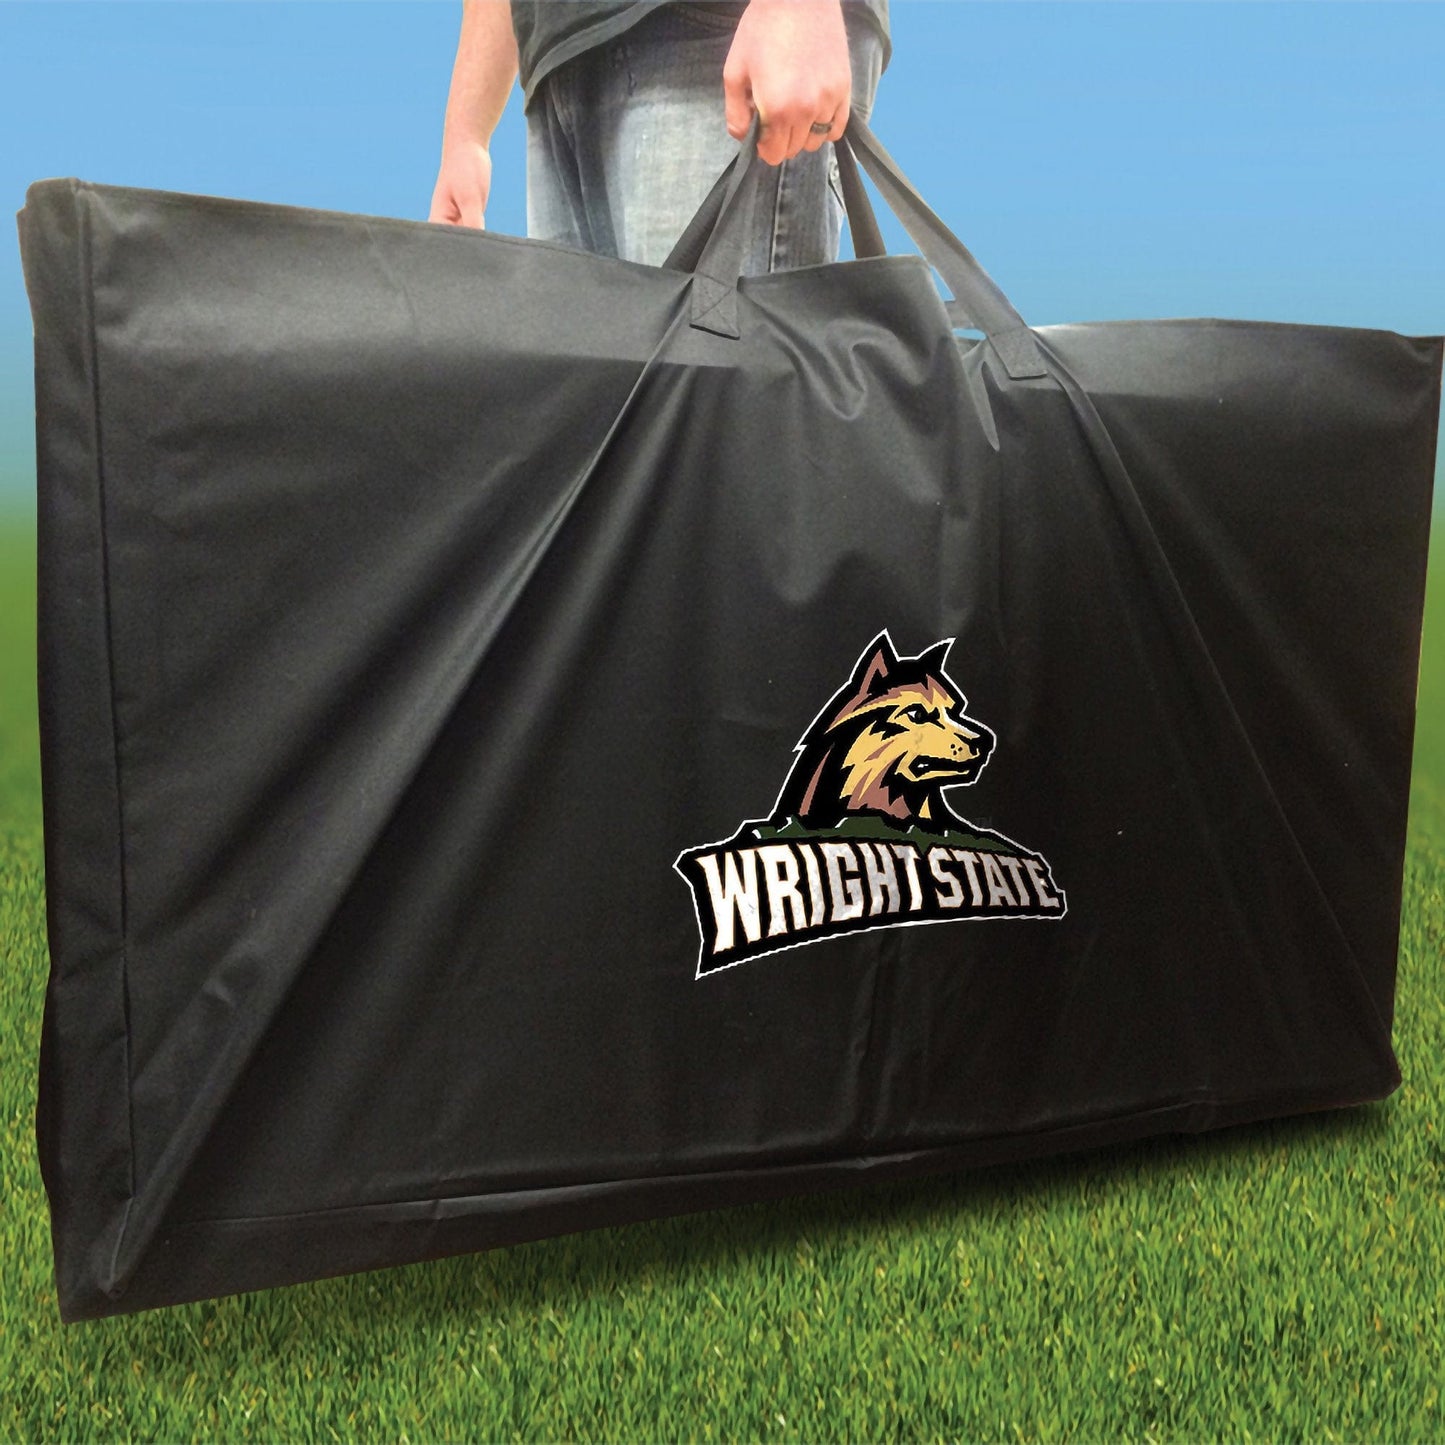 Wright State NCAA Cornhole Carrying Case